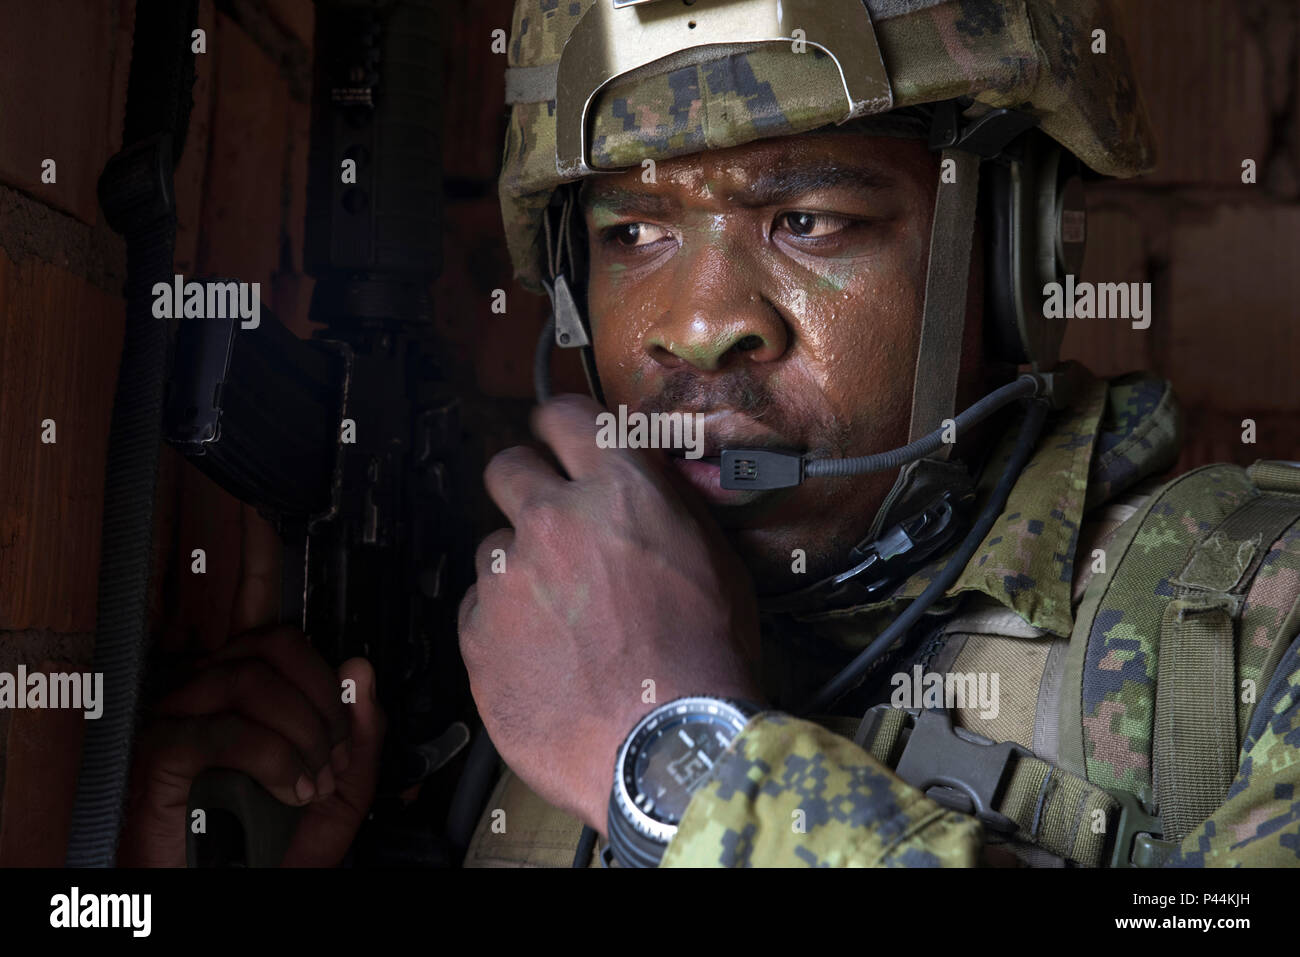 A Canadian soldier communicates on his radio during a Military Operations  in Urban Terrain in Wedzryn, Poland July 14, 2016, which was part of  exercise Anakonda 2016. The exercise is a Polish-led,